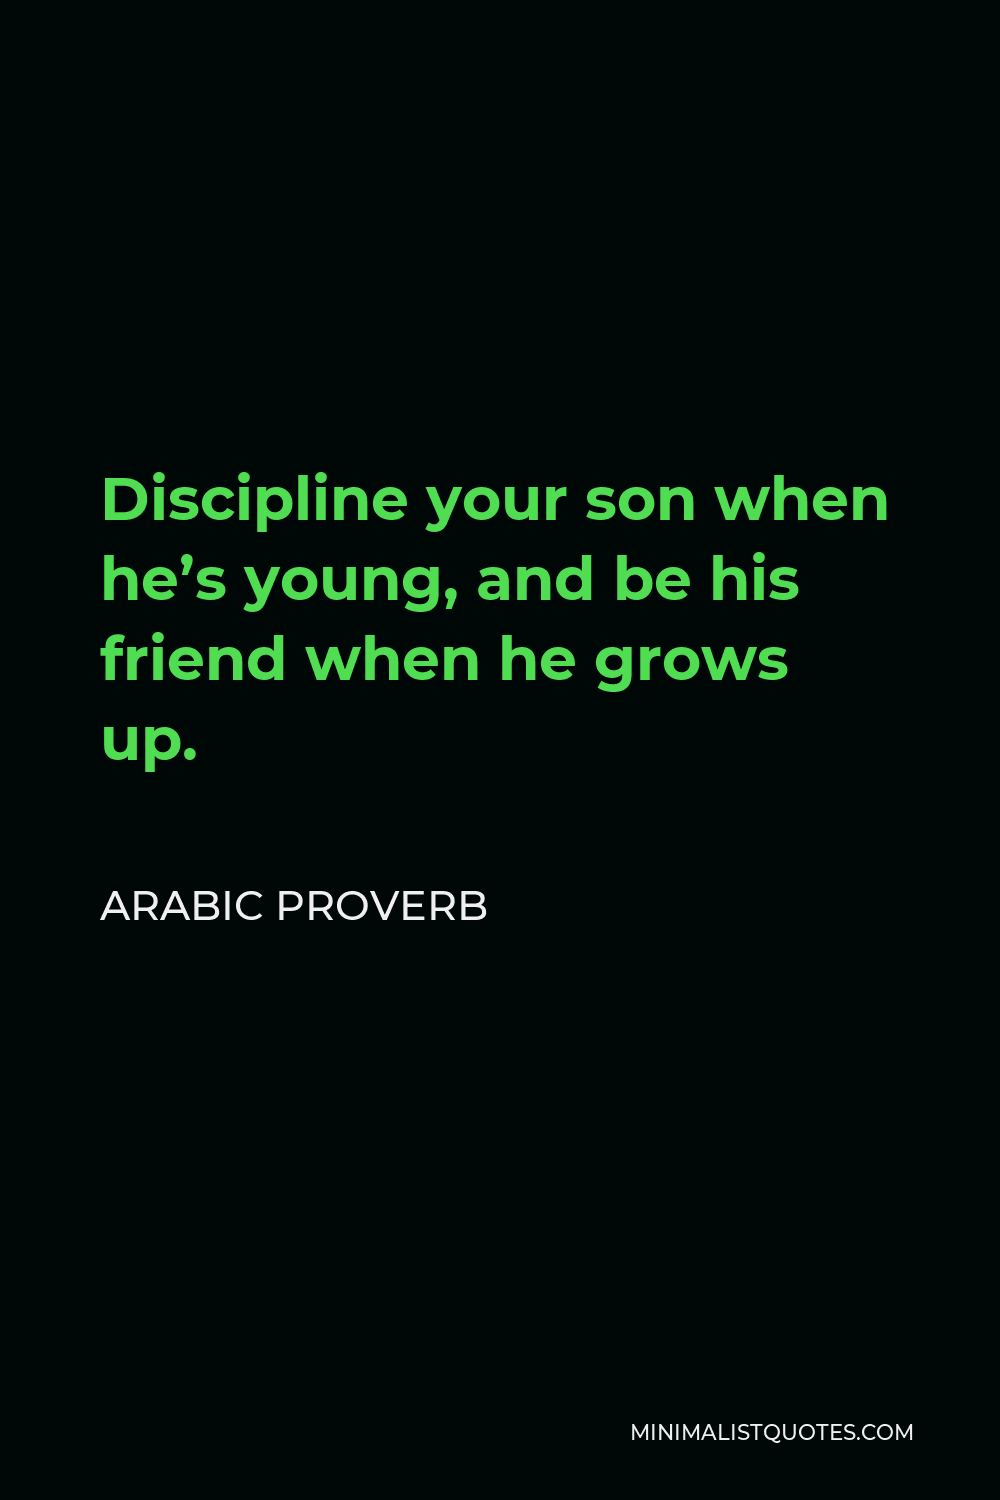 Arabic Proverb Quote - Discipline your son when he’s young, and be his friend when he grows up.